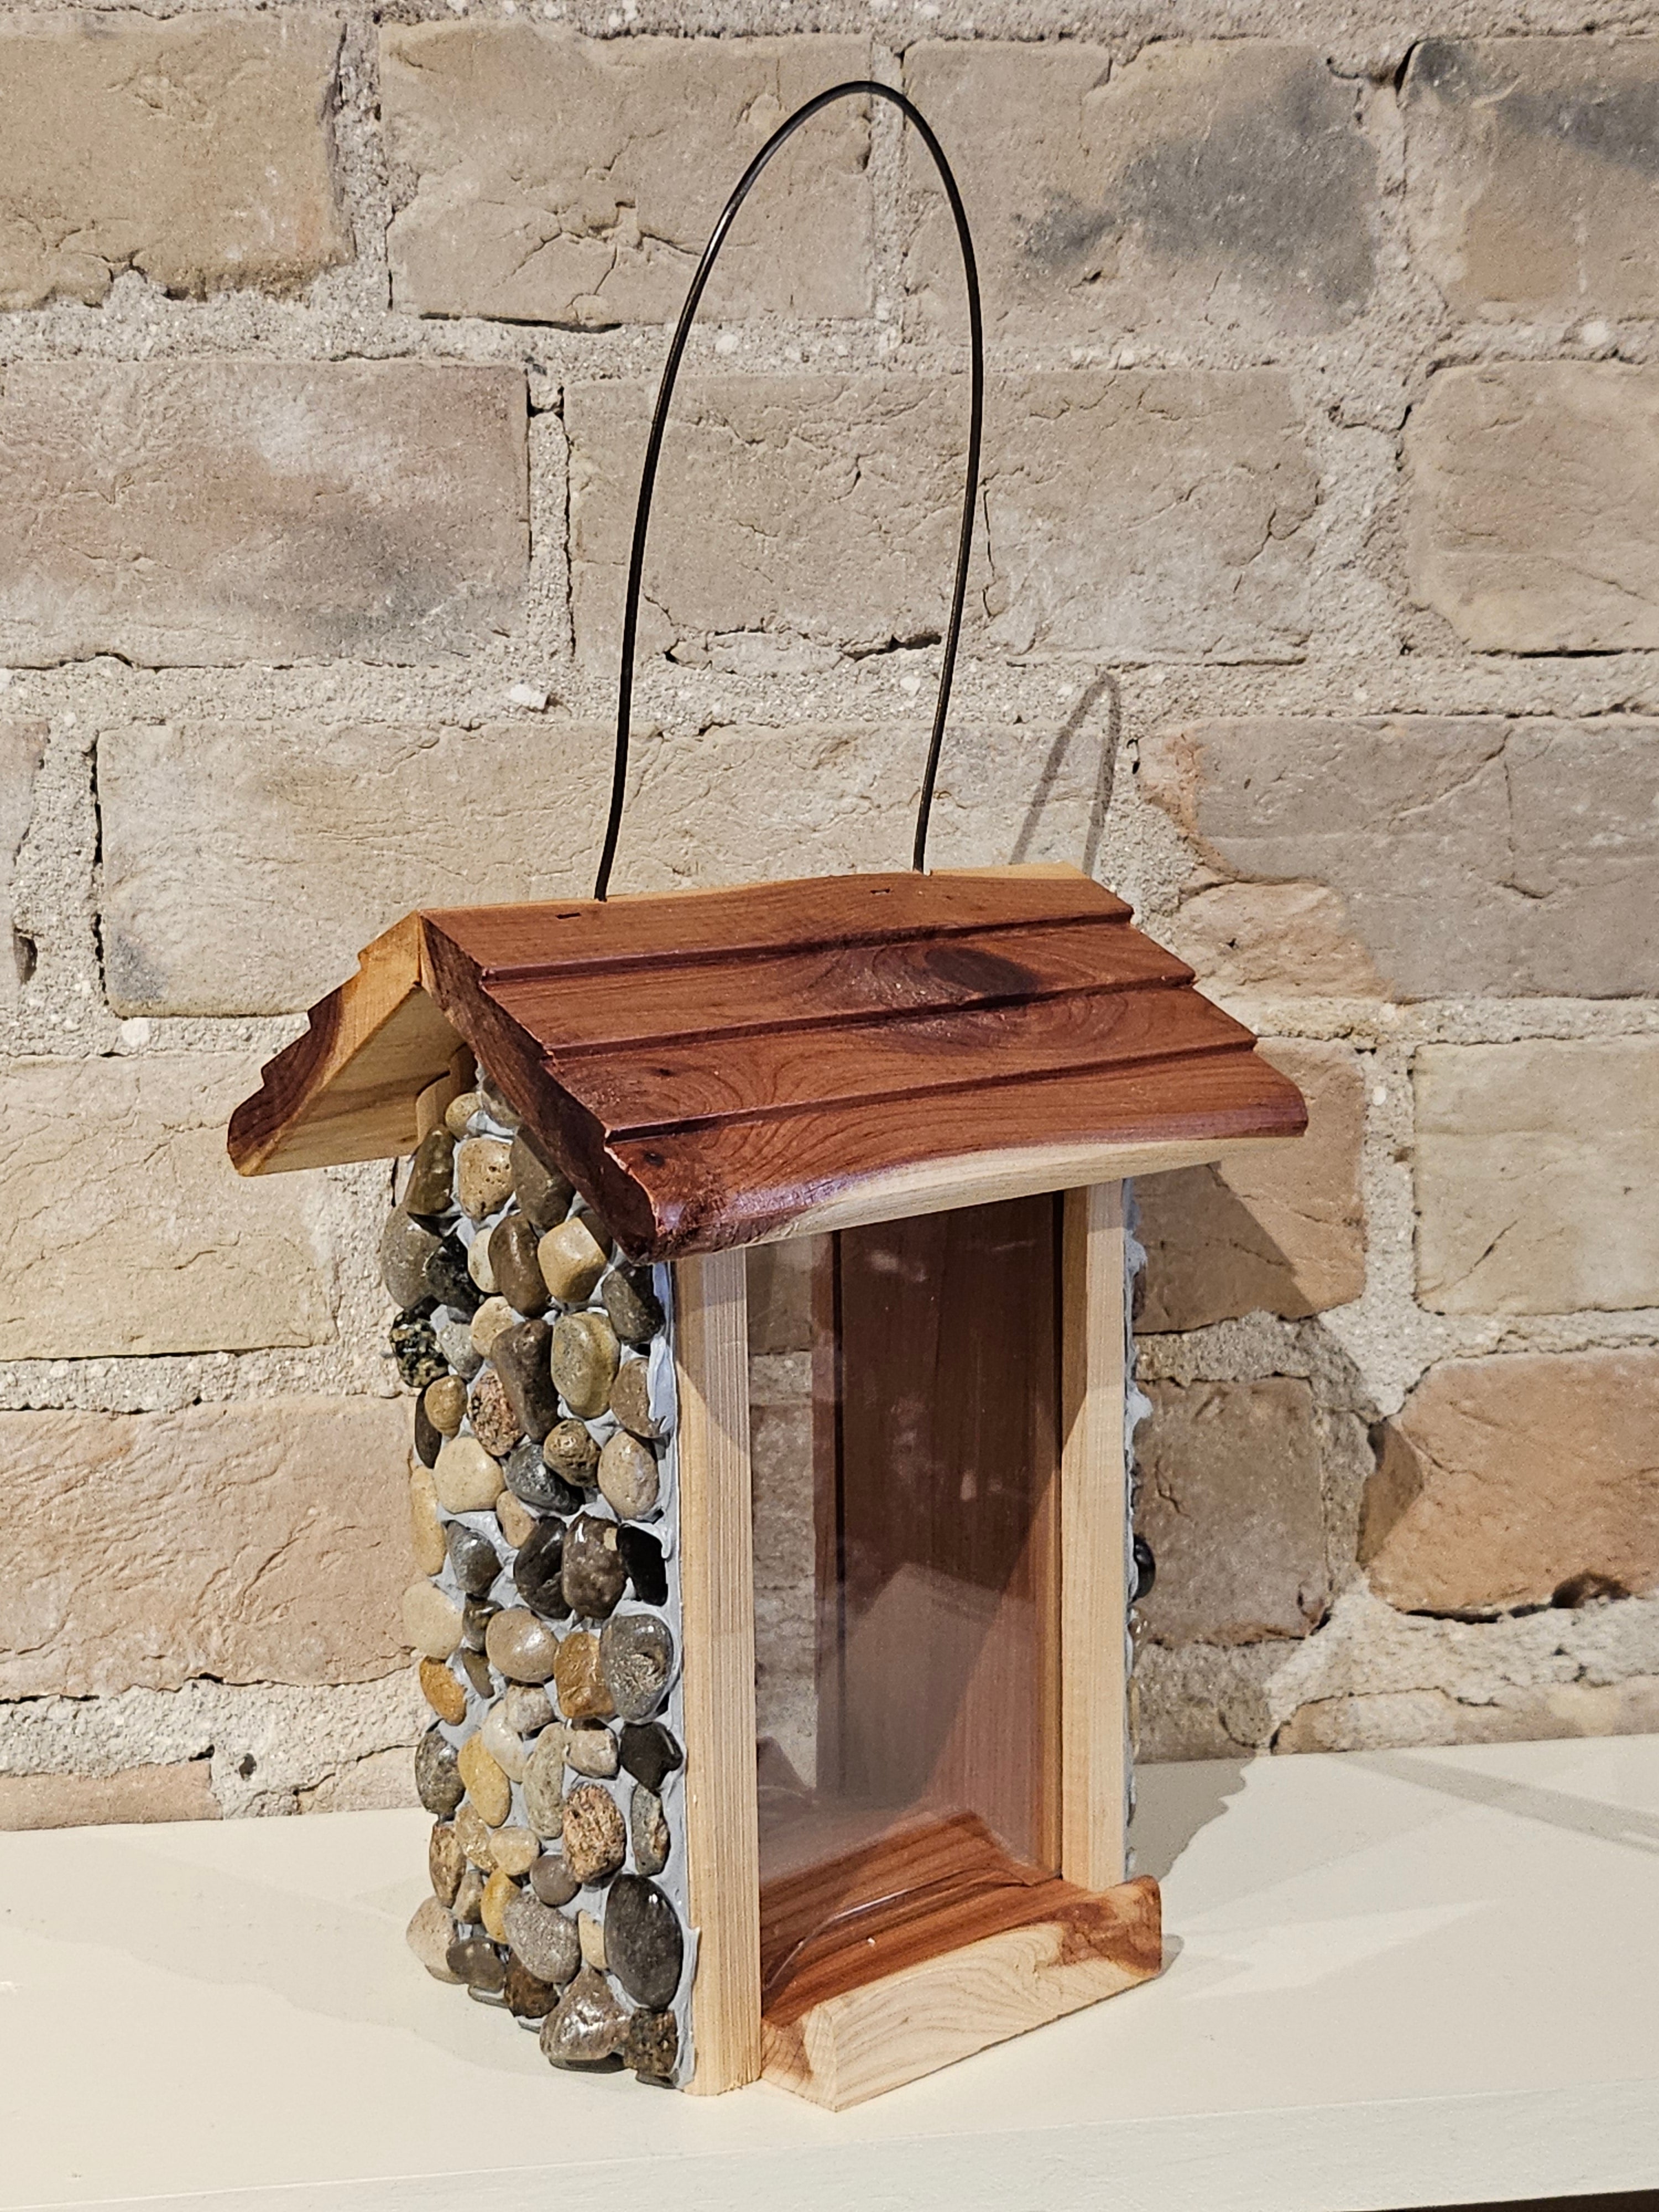 Bird Feeder - Stone sides with wood bottom and roof